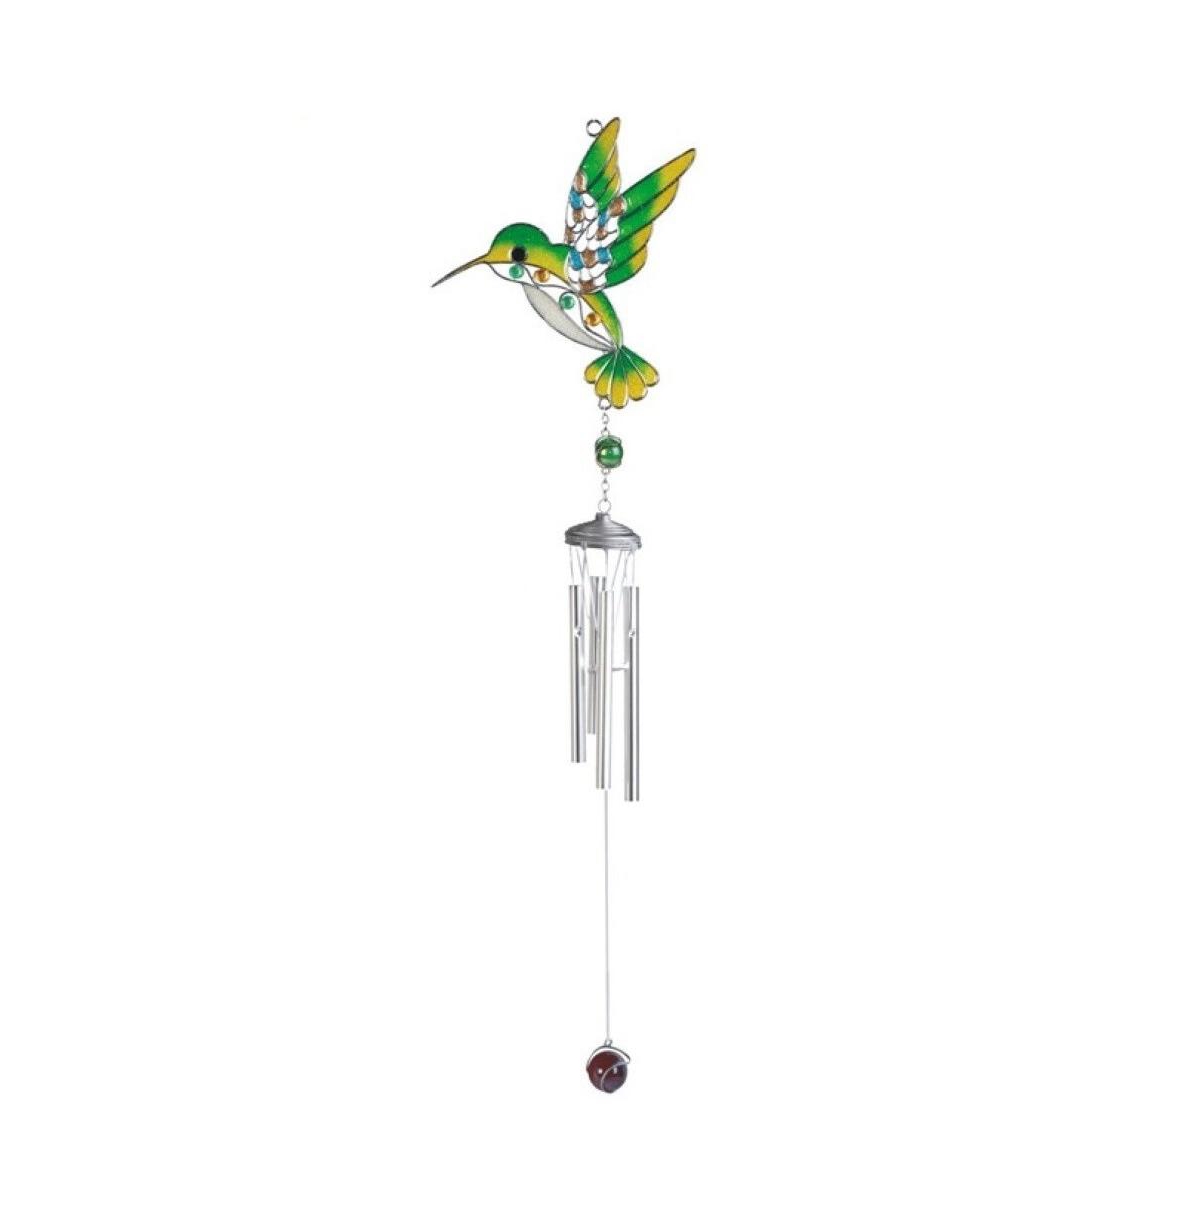 31" Long Green Hummingbird Suncatcher Wind Chime Home Decor Perfect Gift for House Warming, Holidays and Birthdays - Silver